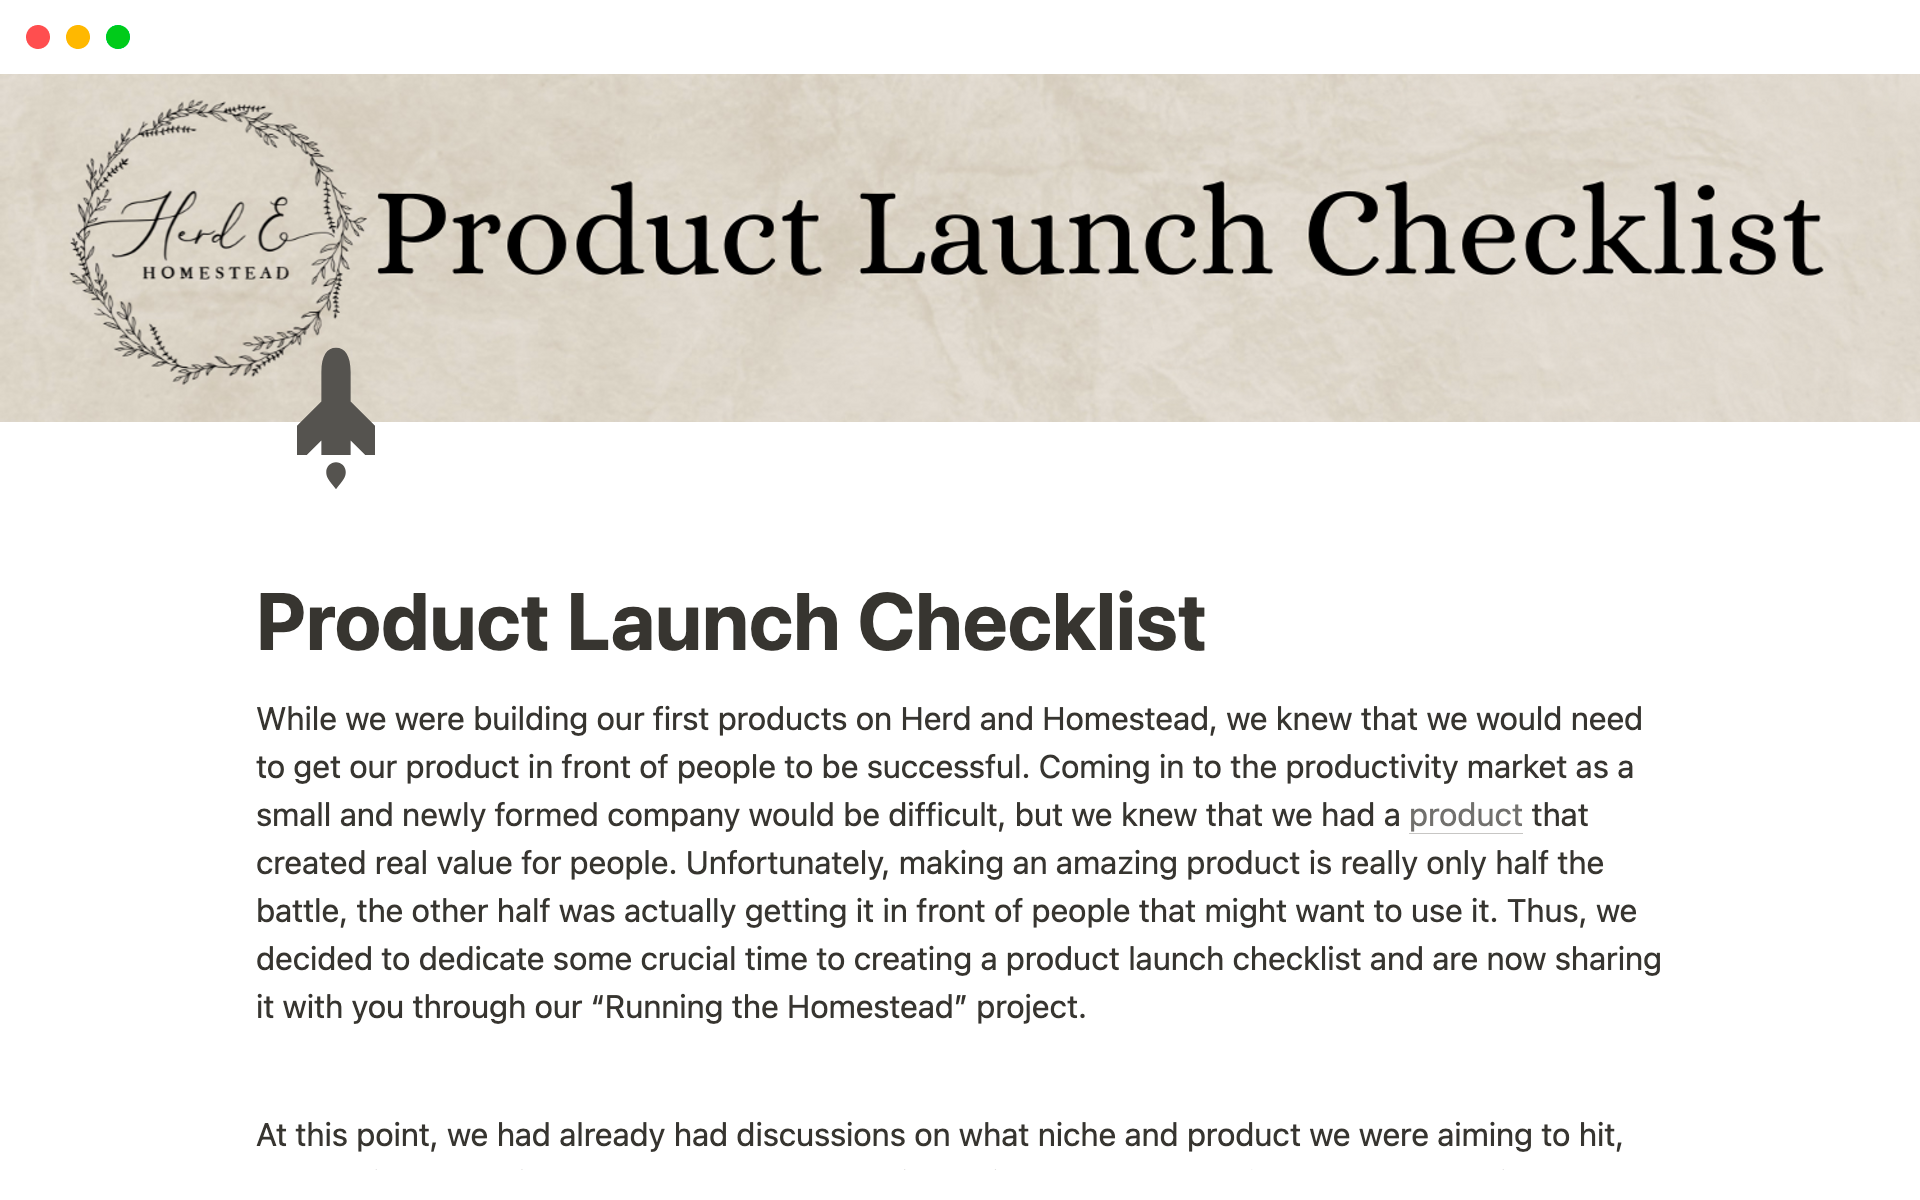 While we were building our first products on Herd and Homestead, we knew that we would need to get our product in front of people to be successful, so we made a Product Launch Checklist -- Here it is!